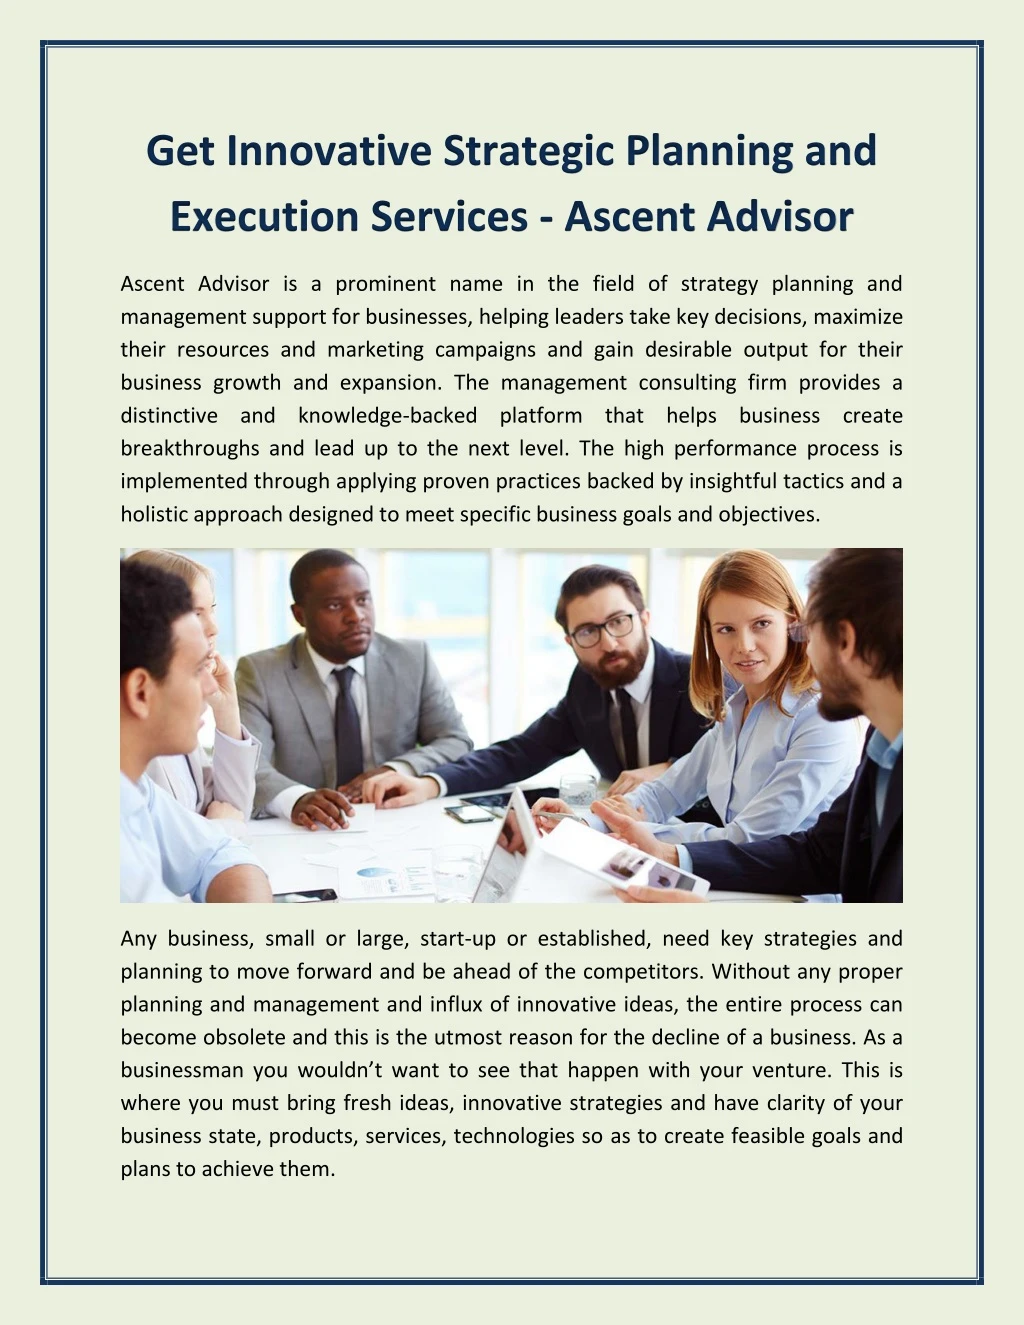 ascent advisor is a prominent name in the field